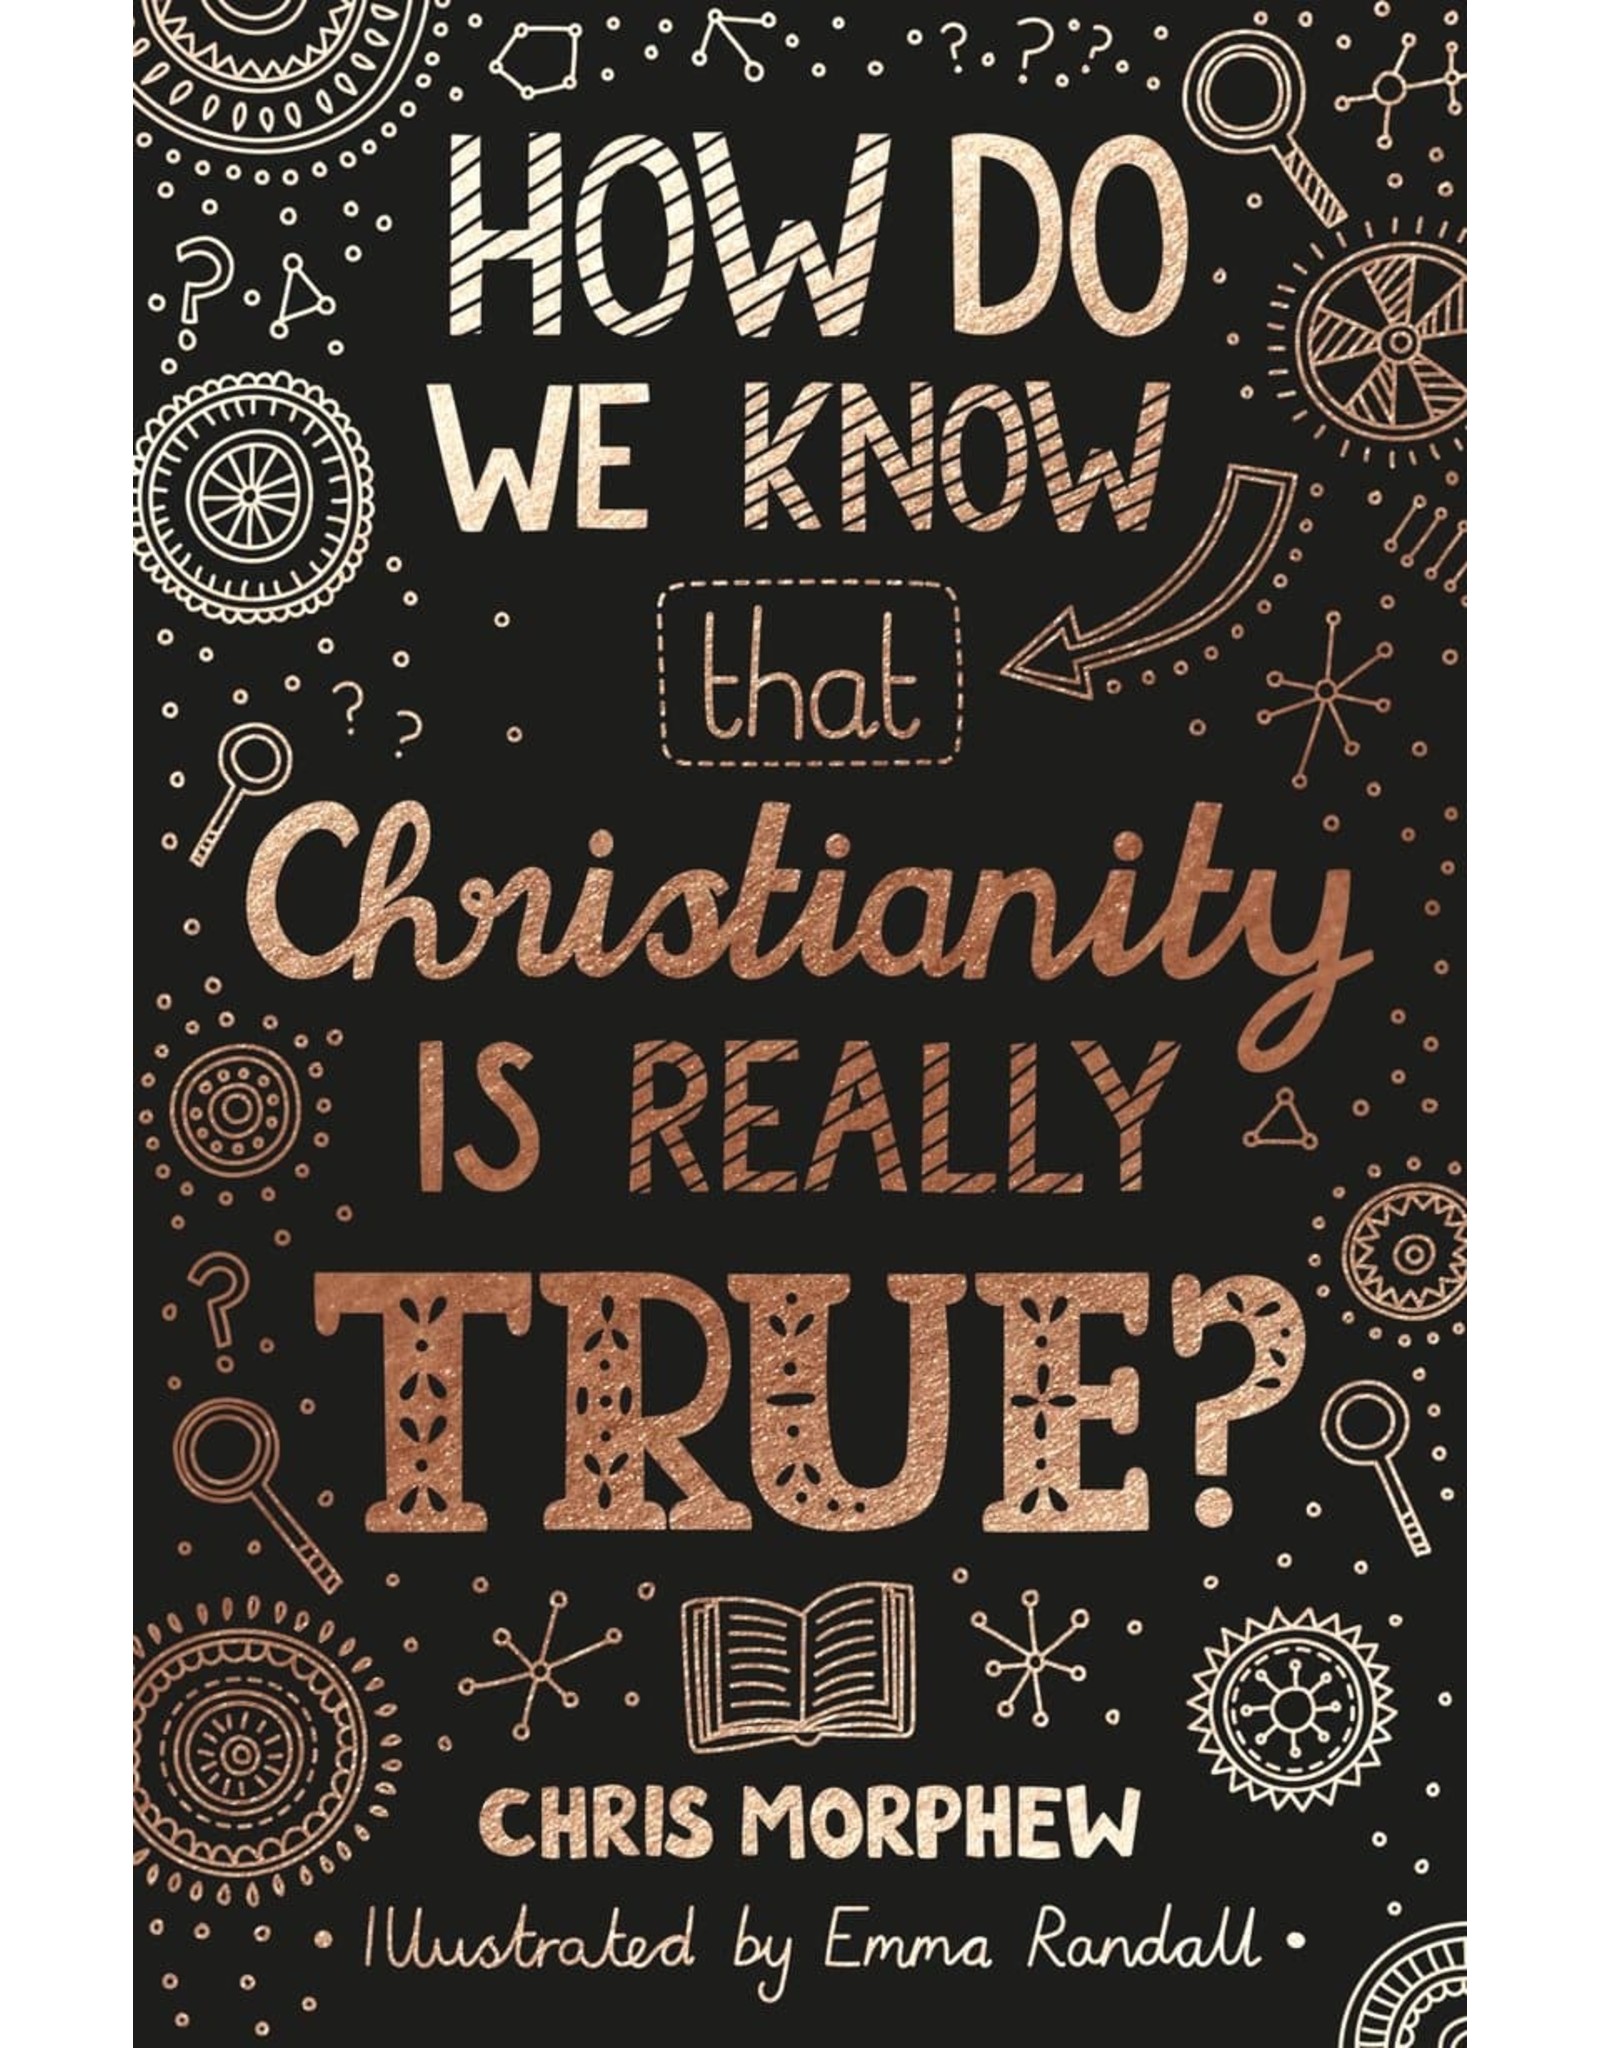 Chris Morphew How Do We Know Christianity Is Really True?